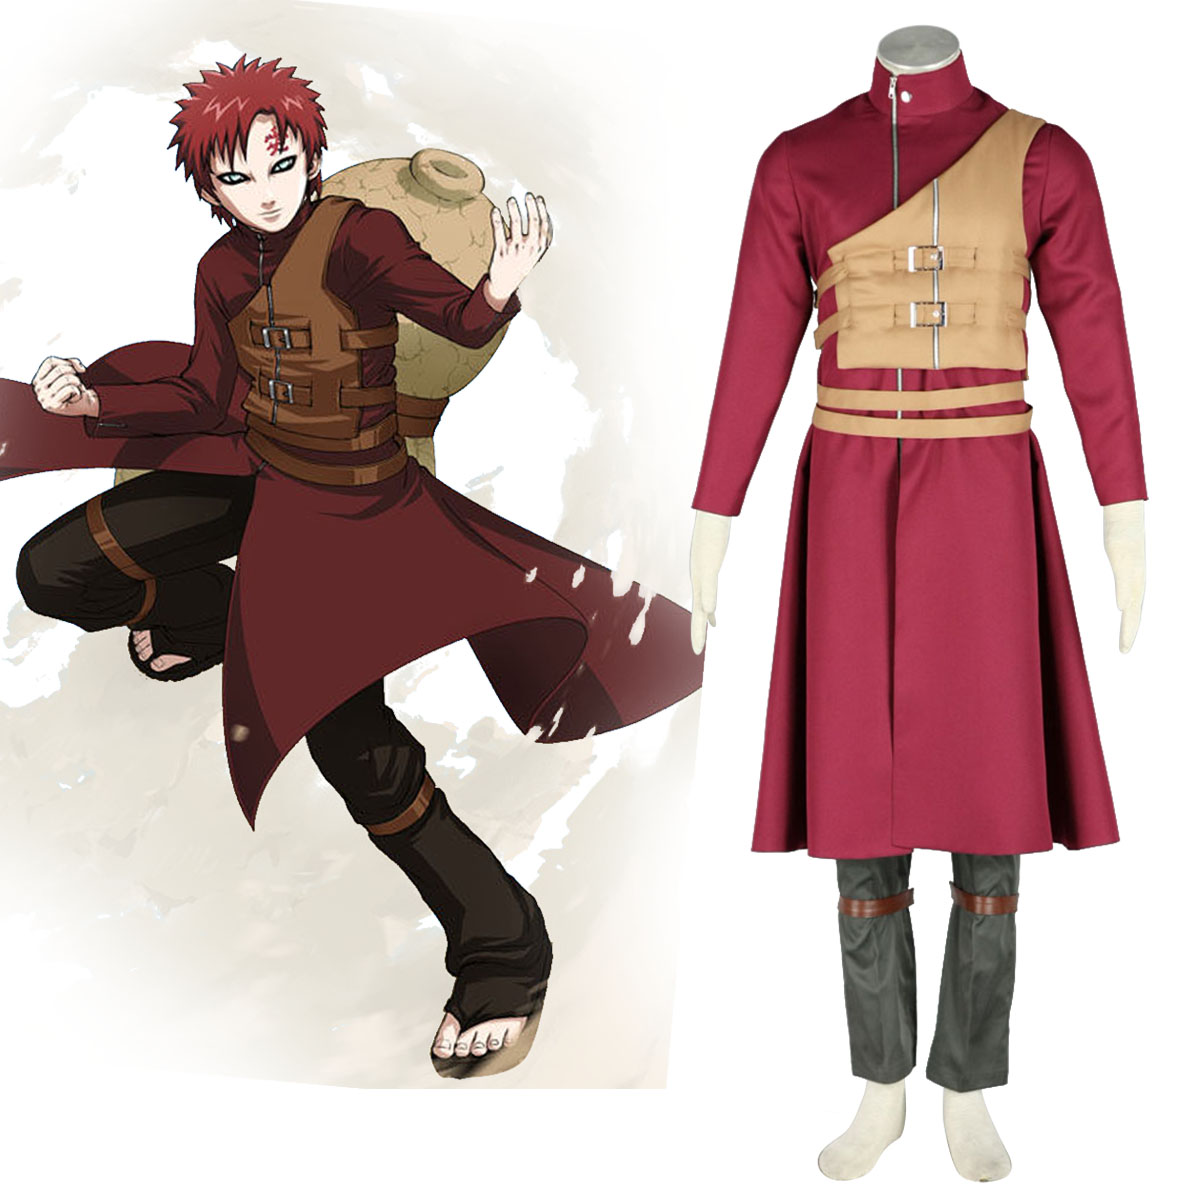 Naruto Shippuden Gaara 6 Anime Cosplay Costumes Outfit